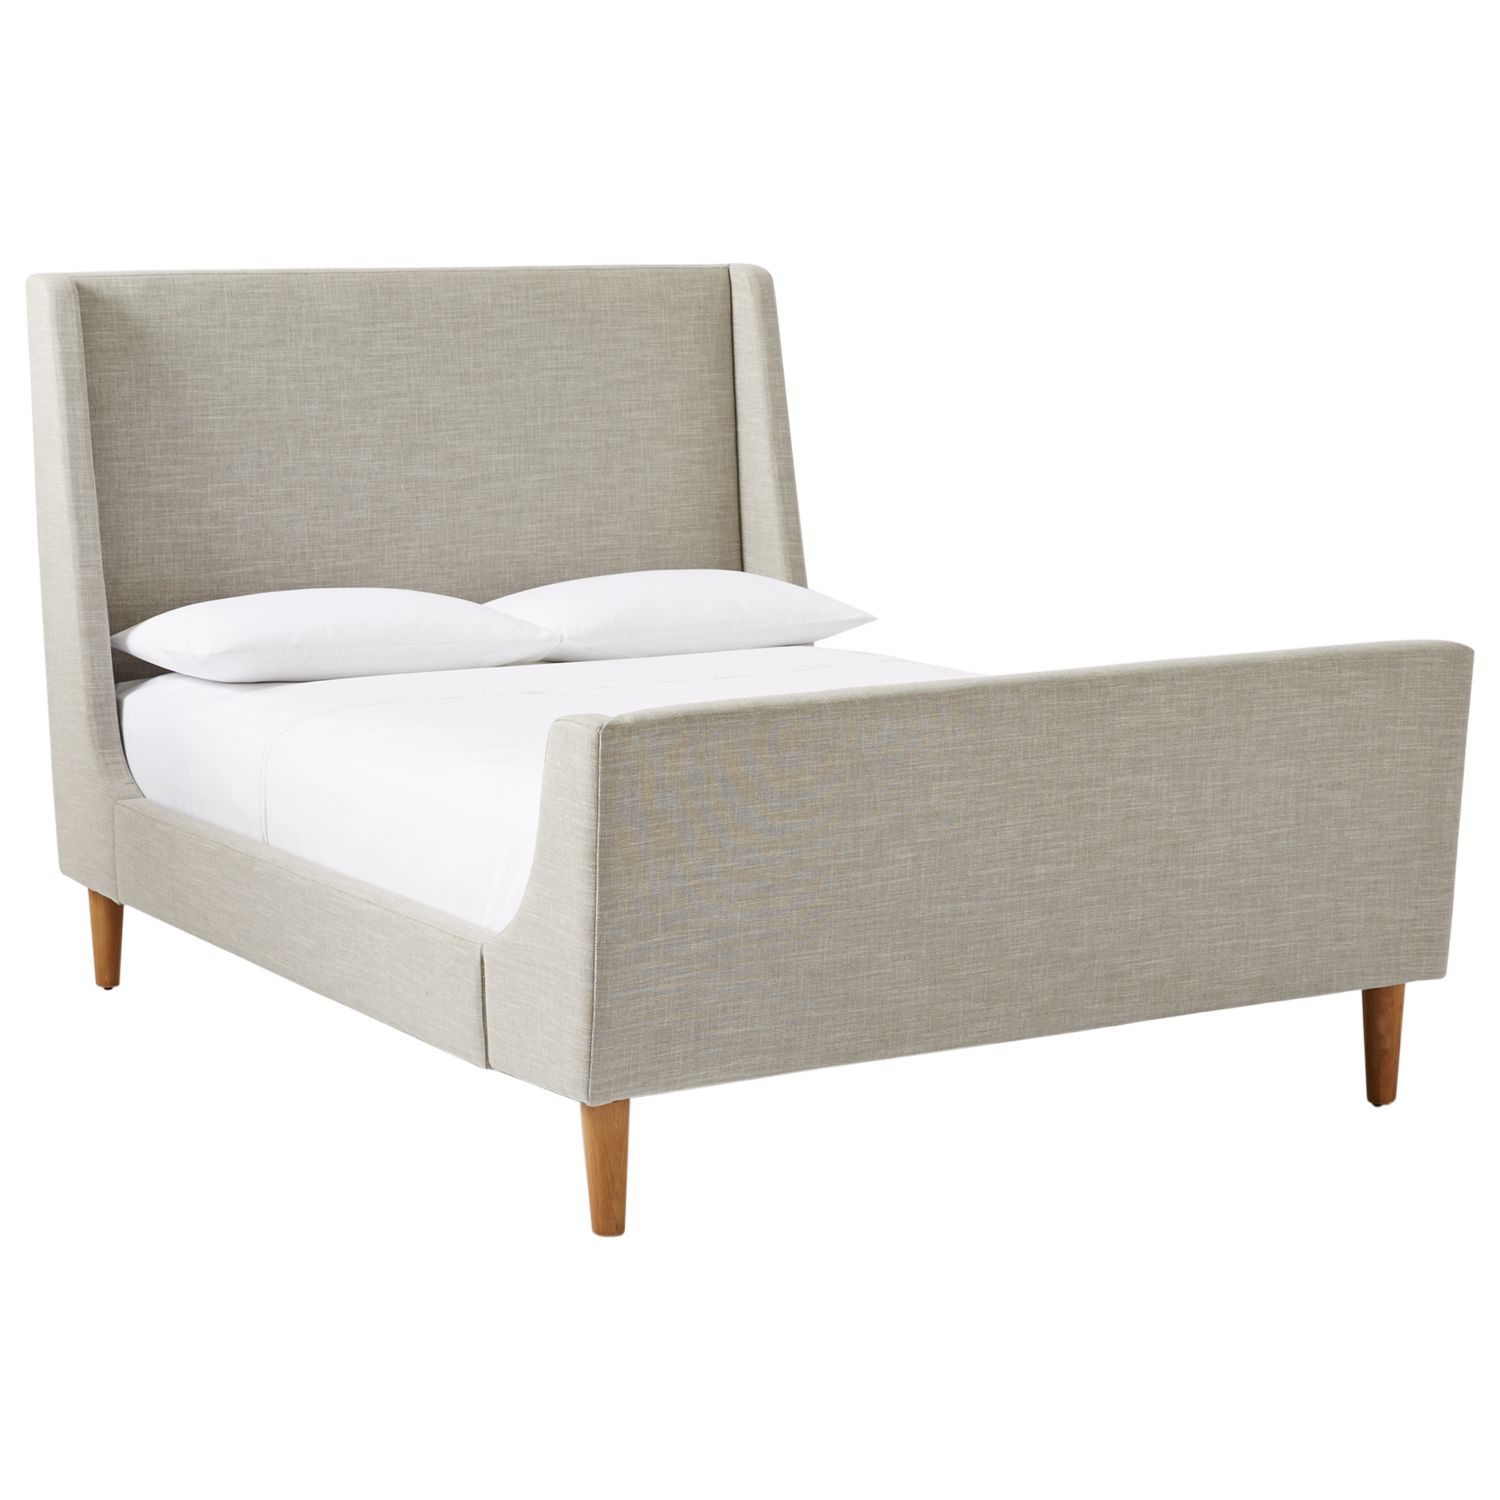 west elm Upholstered Sleigh Bed, King Size at John Lewis & Partners